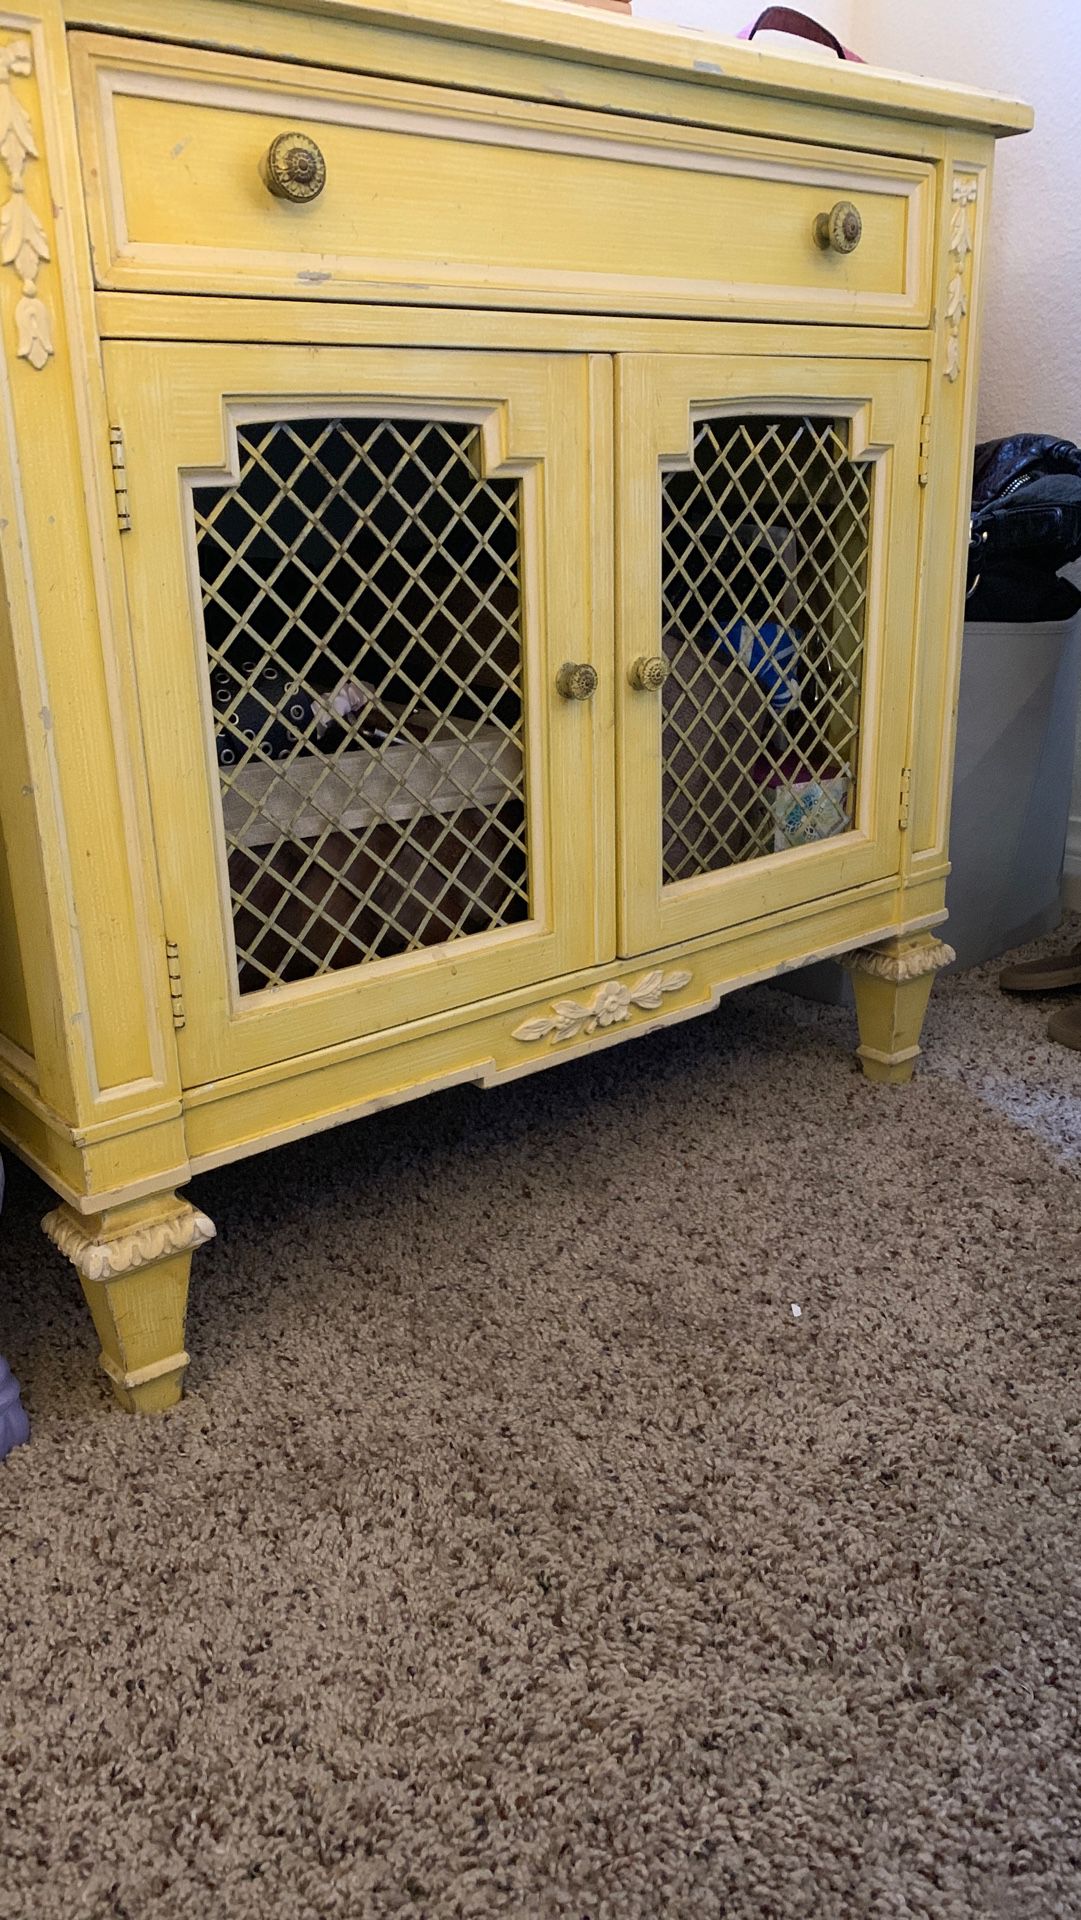 Antique cabinet - yellow